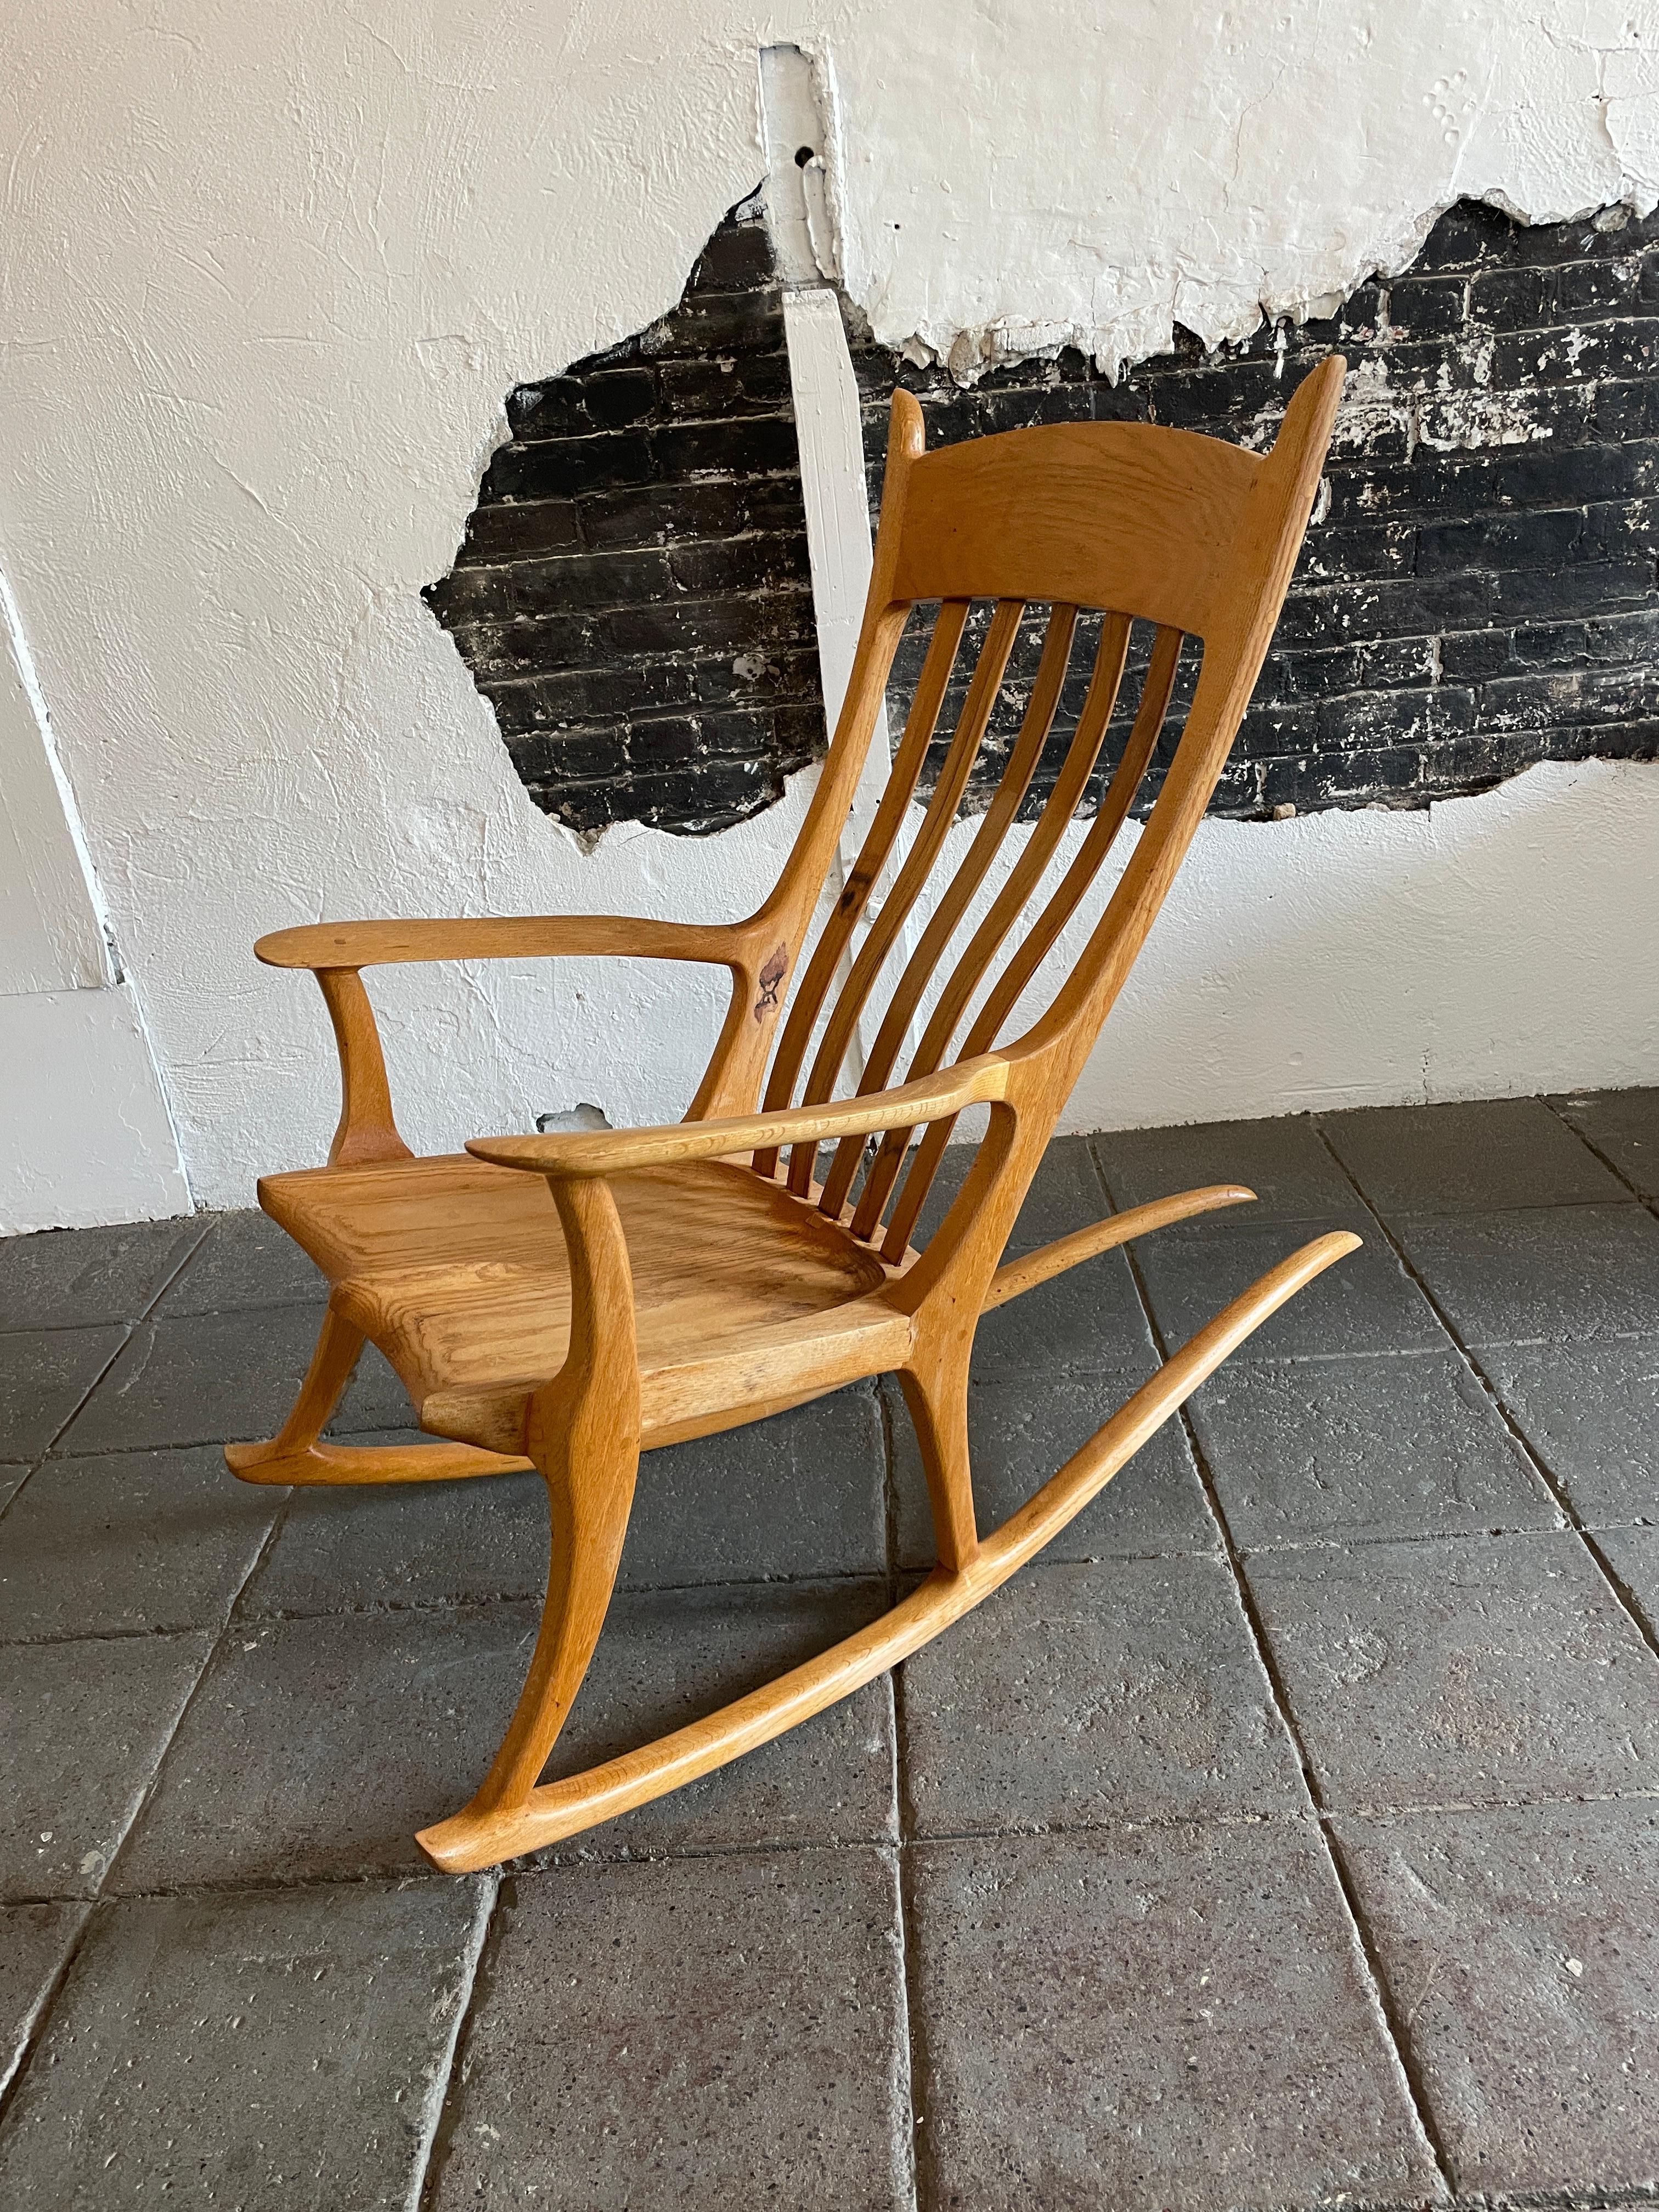 maloof rocking chair for sale